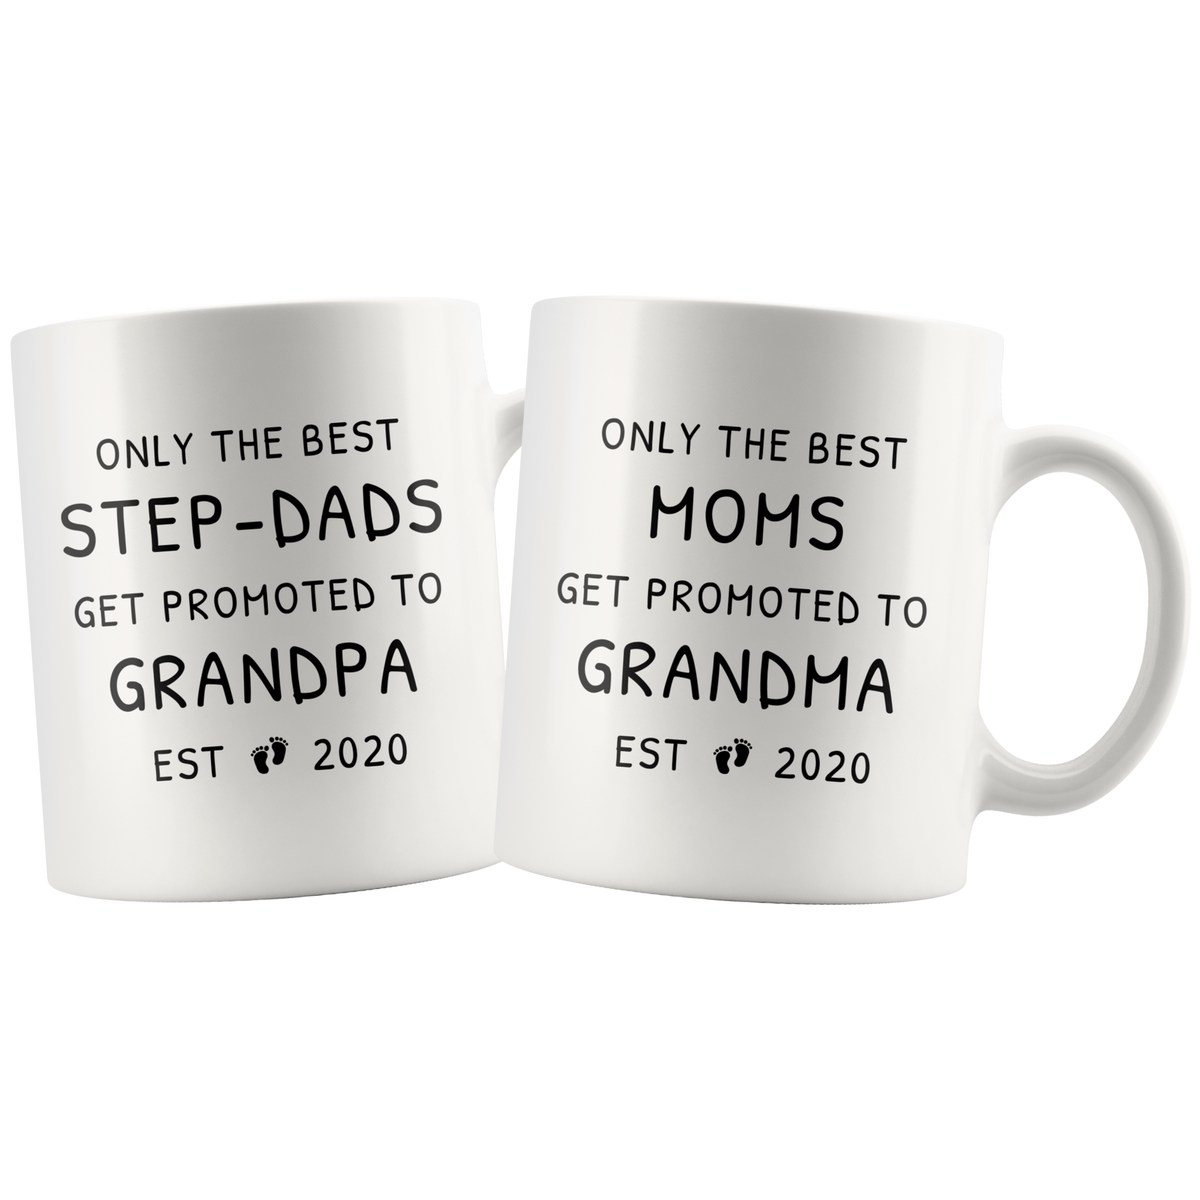 Only Best Moms Best Step-dads Get Promoted To Grandma Grandpa Set of 2 11oz Mugs